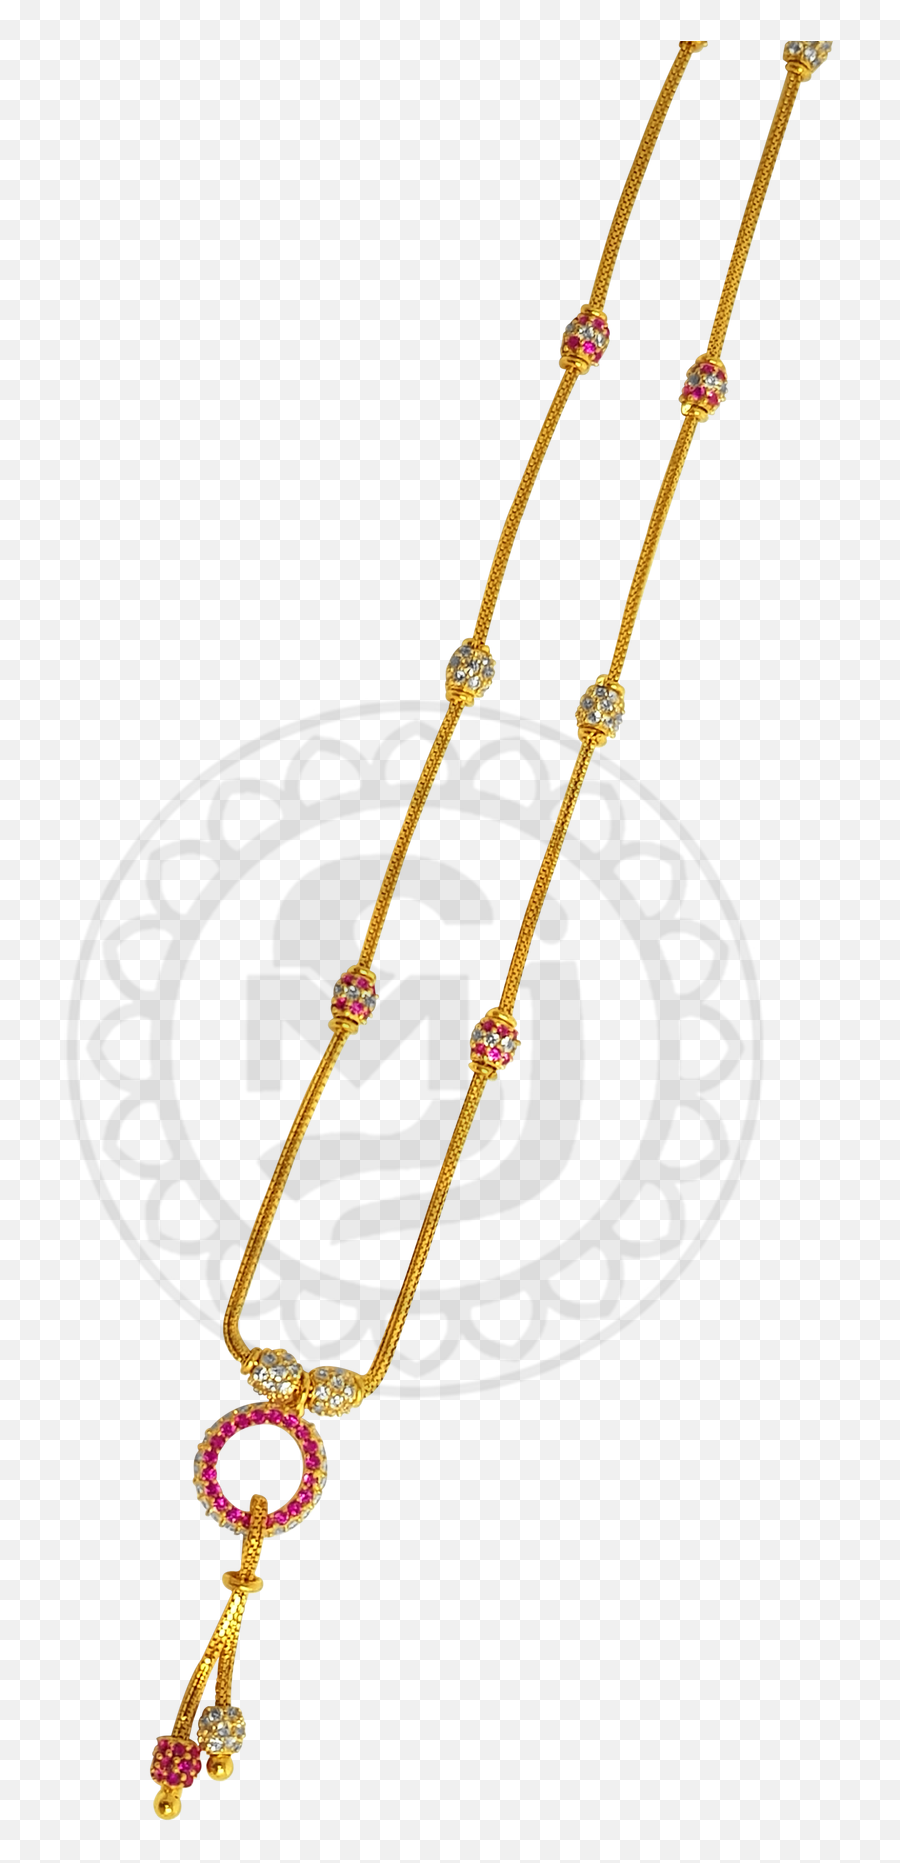 Download Hd Gold Chains - 221225 Chain Transparent Png Image Emoji,Gold Chain Transparent Background